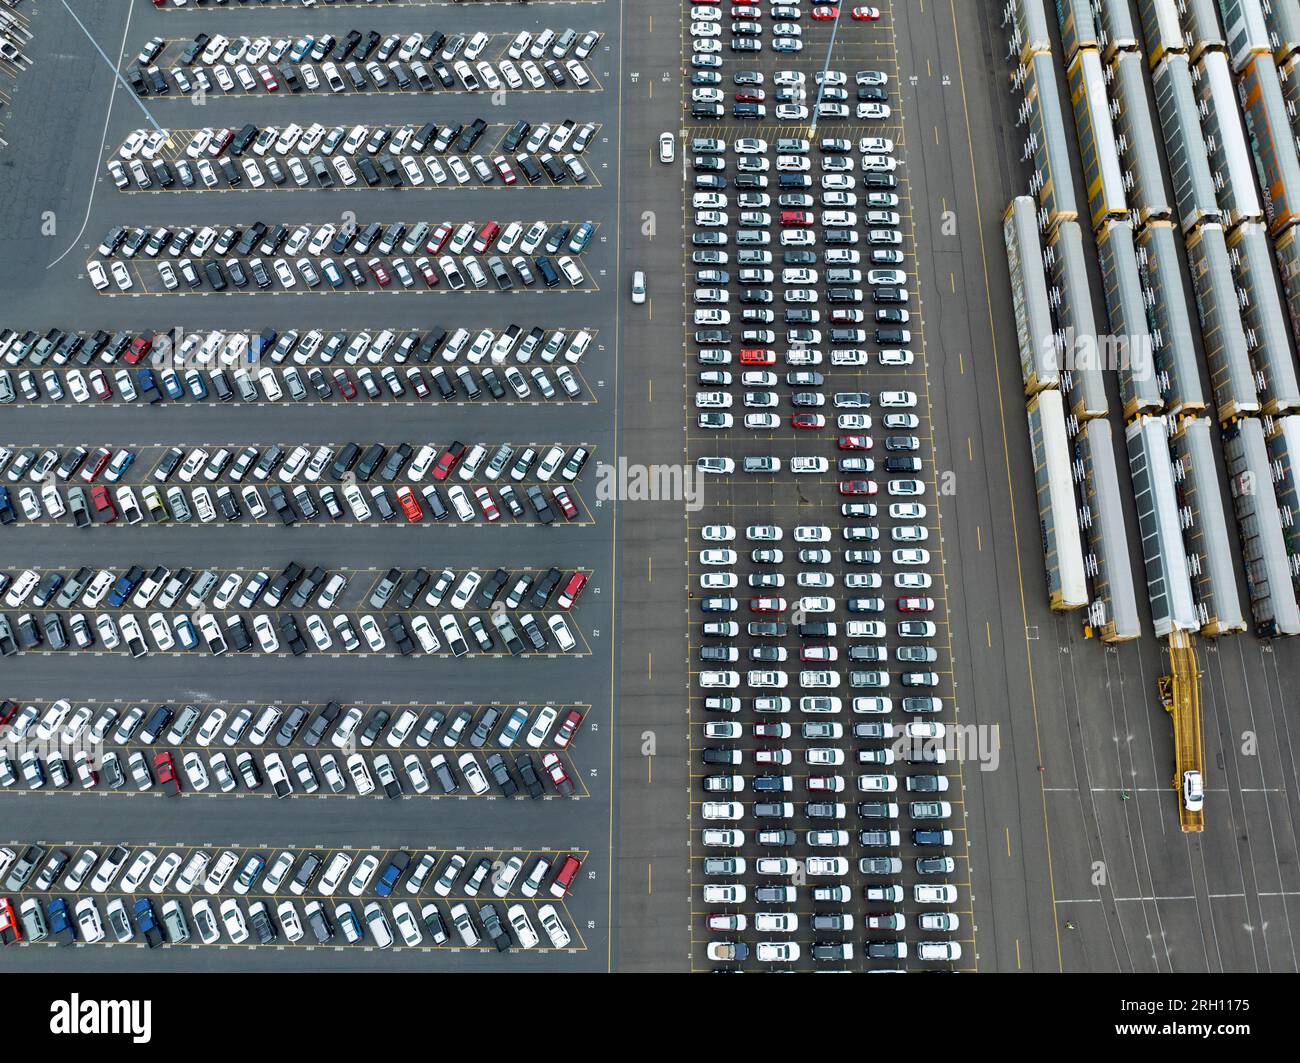 Imported auto storage and transfer yard where cars arrive by ship and are distributed by rail and truck to points in the U.S. Stock Photo